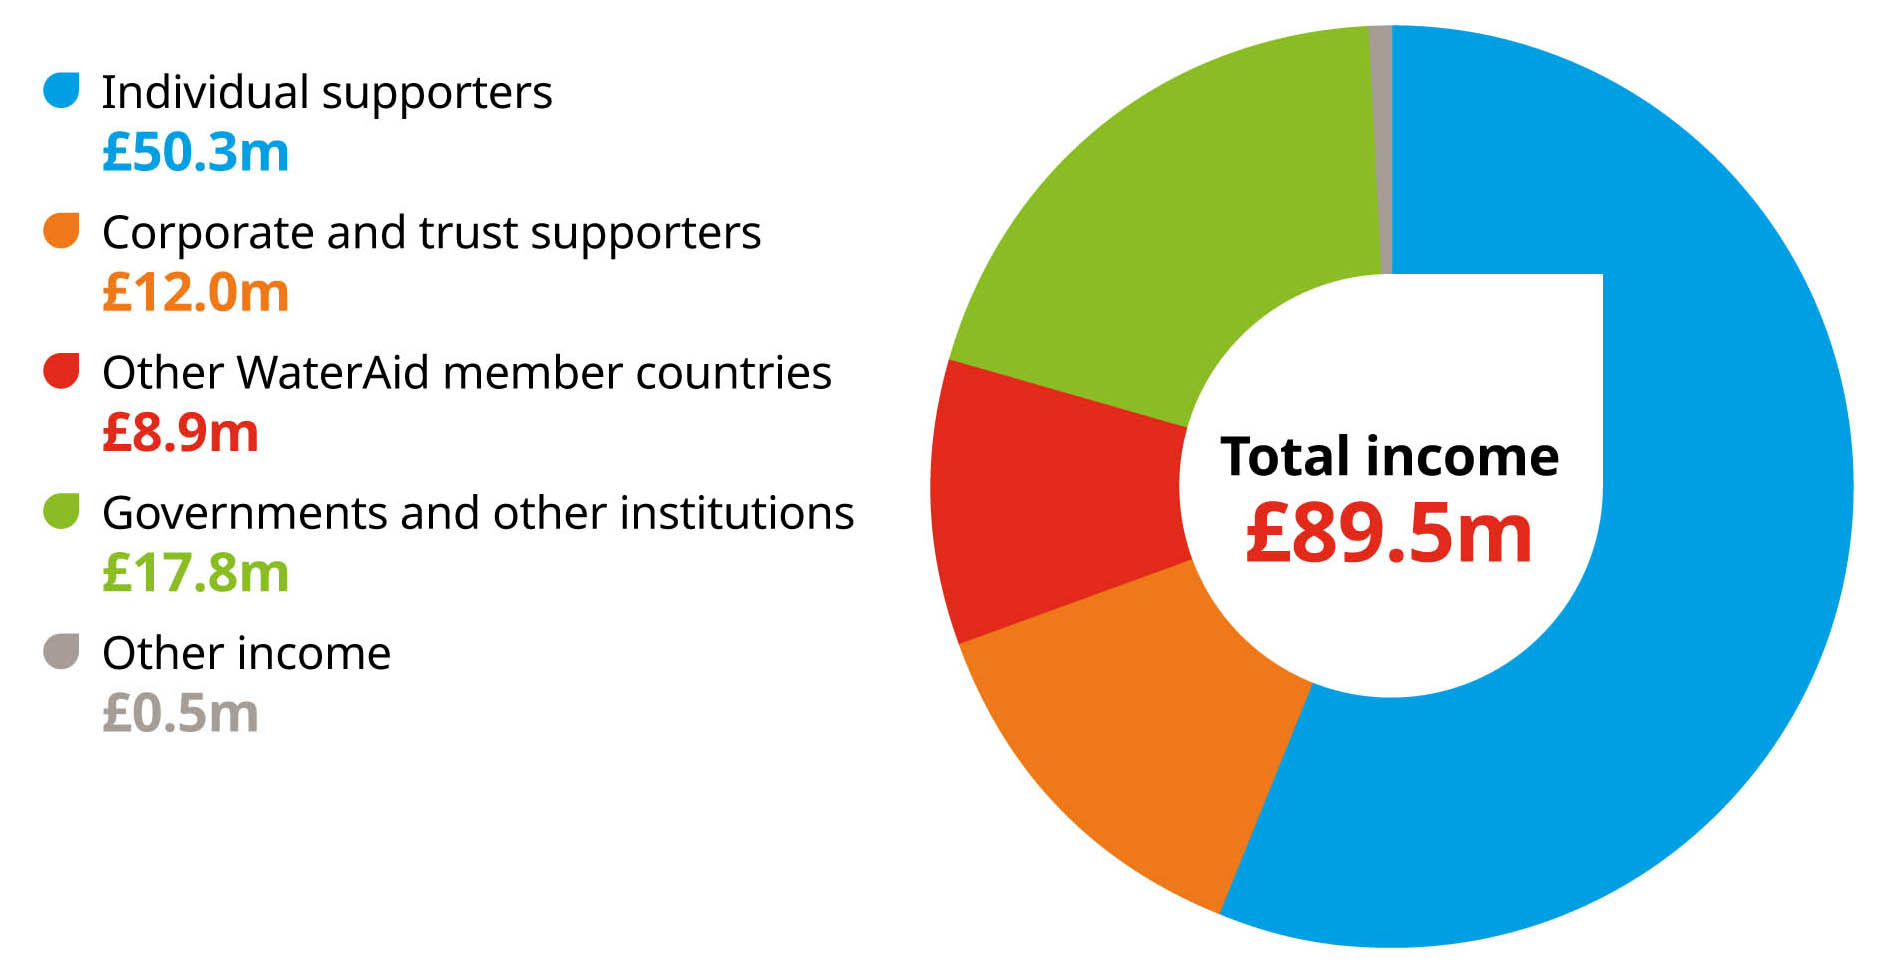 Pie chart showing Individual supporters £50.3m  Corporate and trust supporters £12.0m  Other WaterAid member countries £8.9m  Governments and other institutions £17.8m  Other income £0.5m